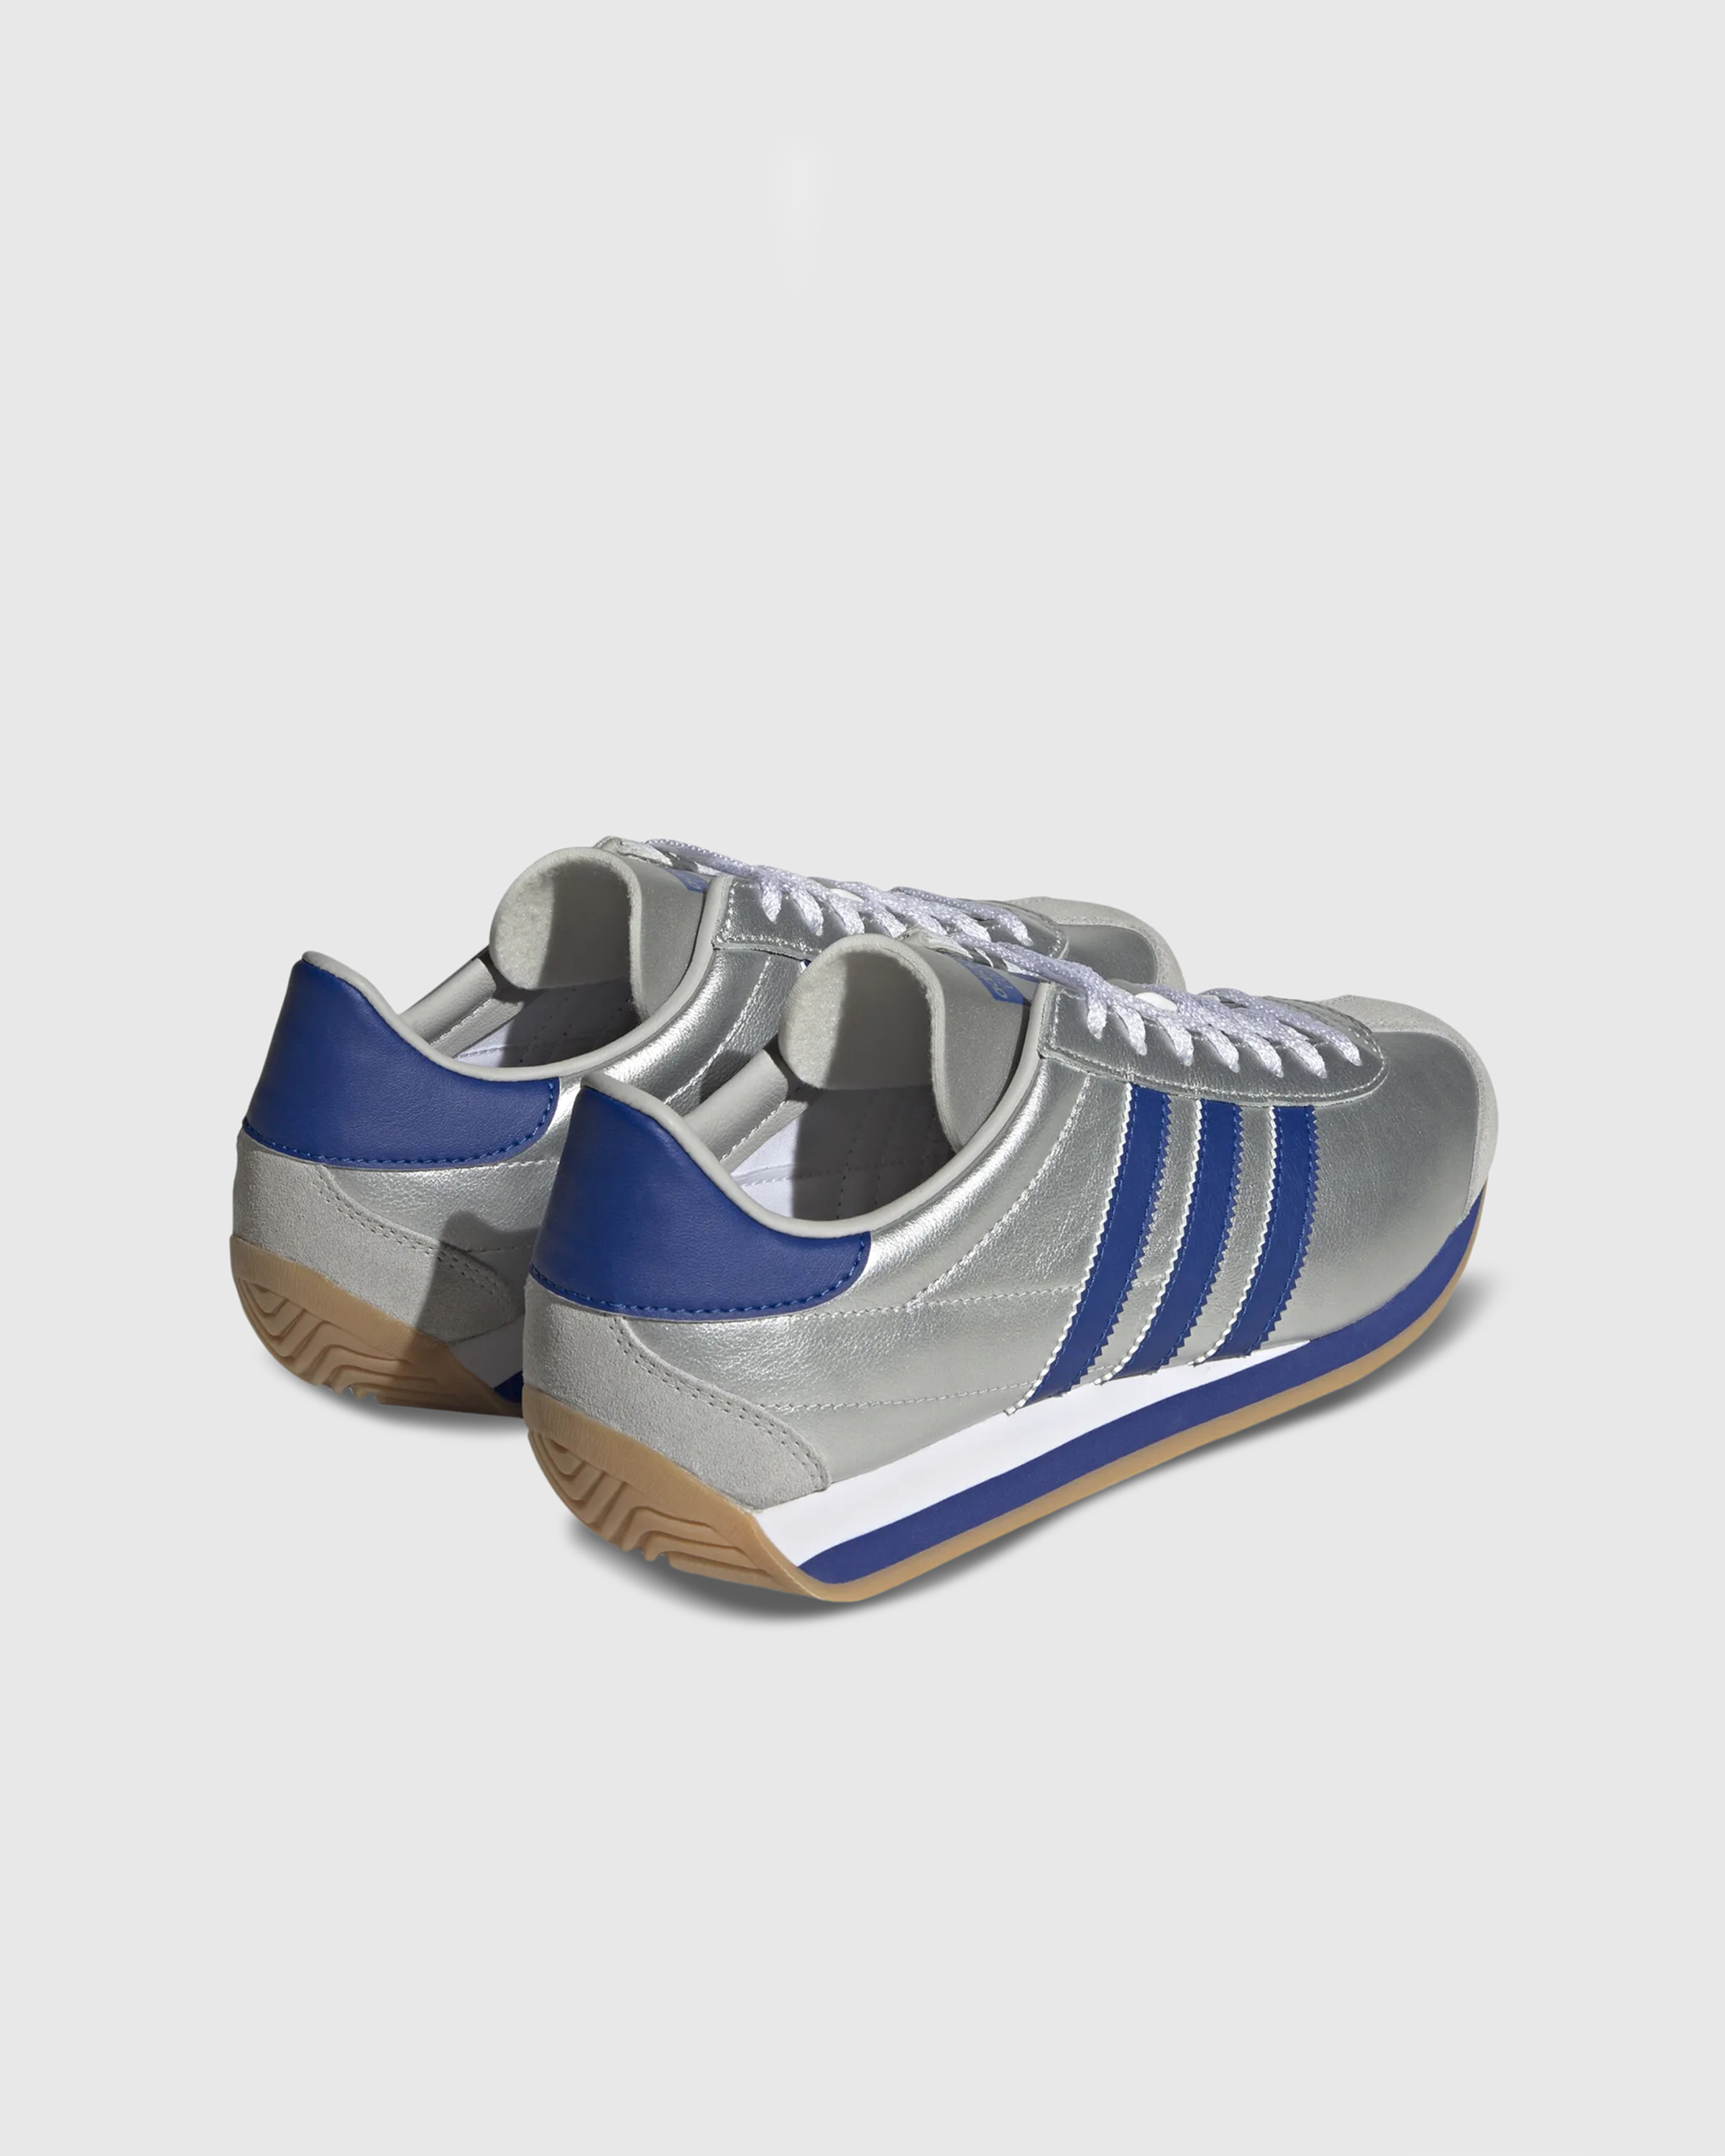 Adidas – Country OG Matte Silver - Sneakers - Silver - Image 4